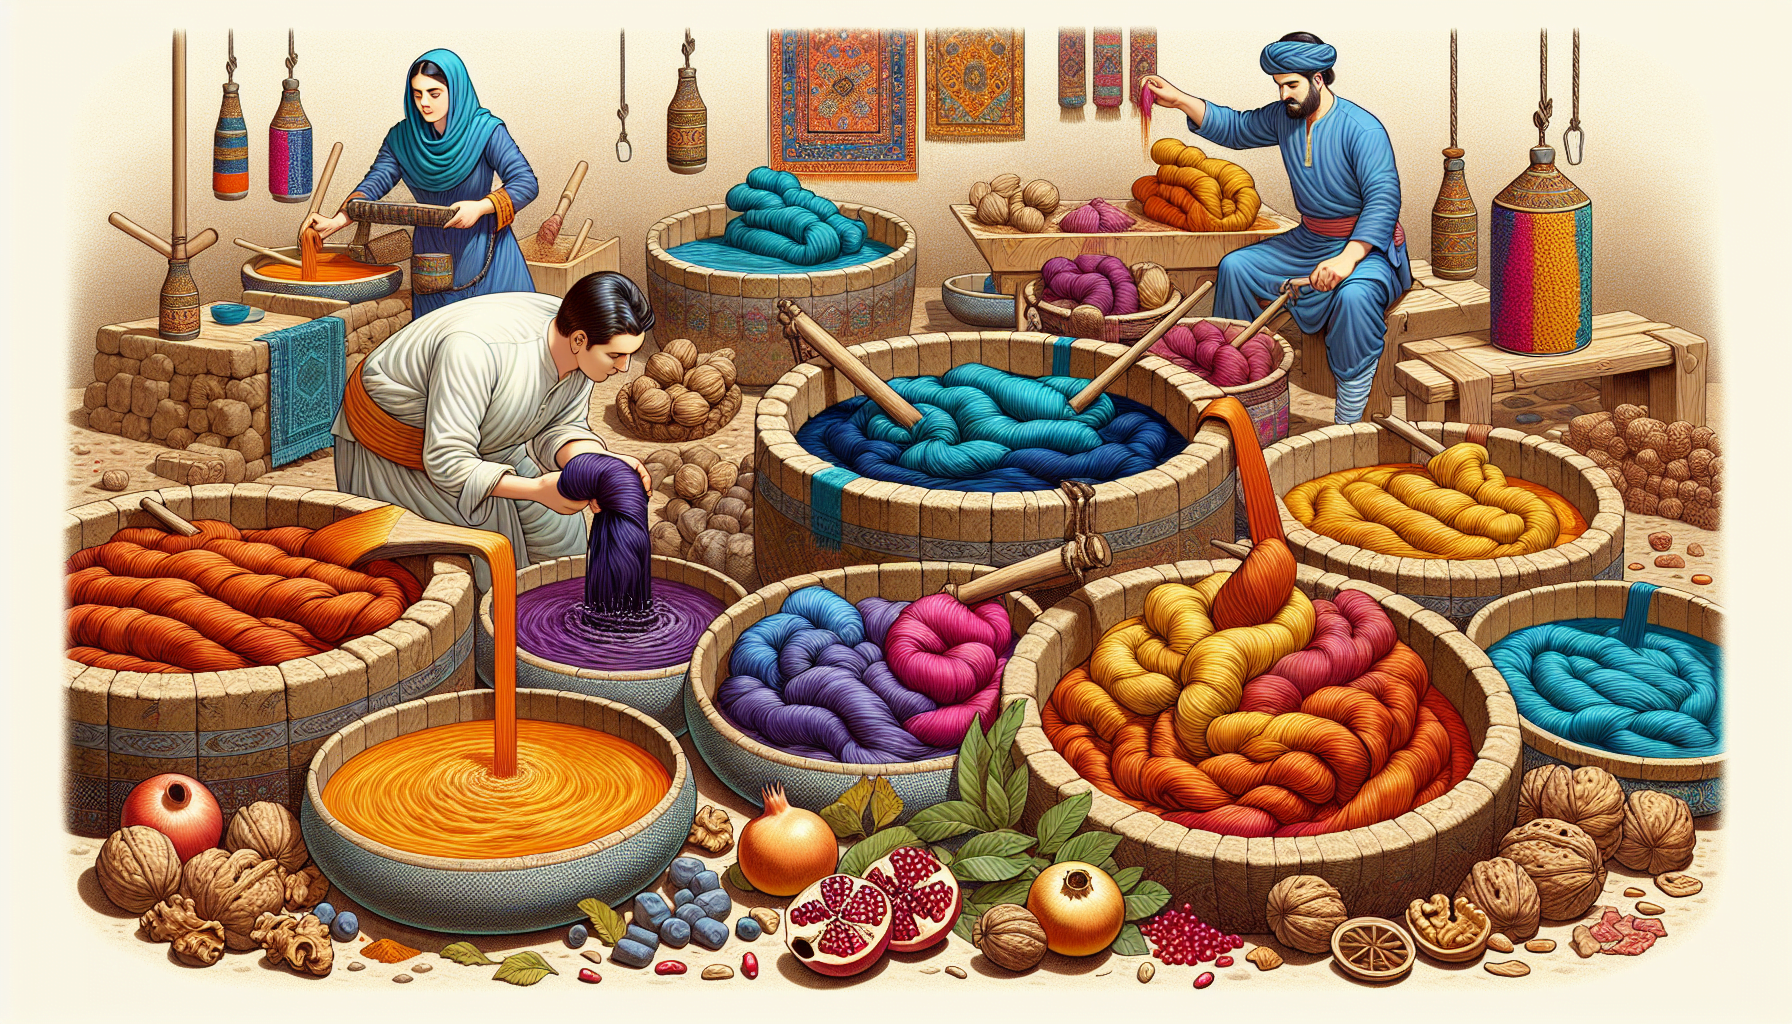 Illustration of natural dyeing process for Persian rugs